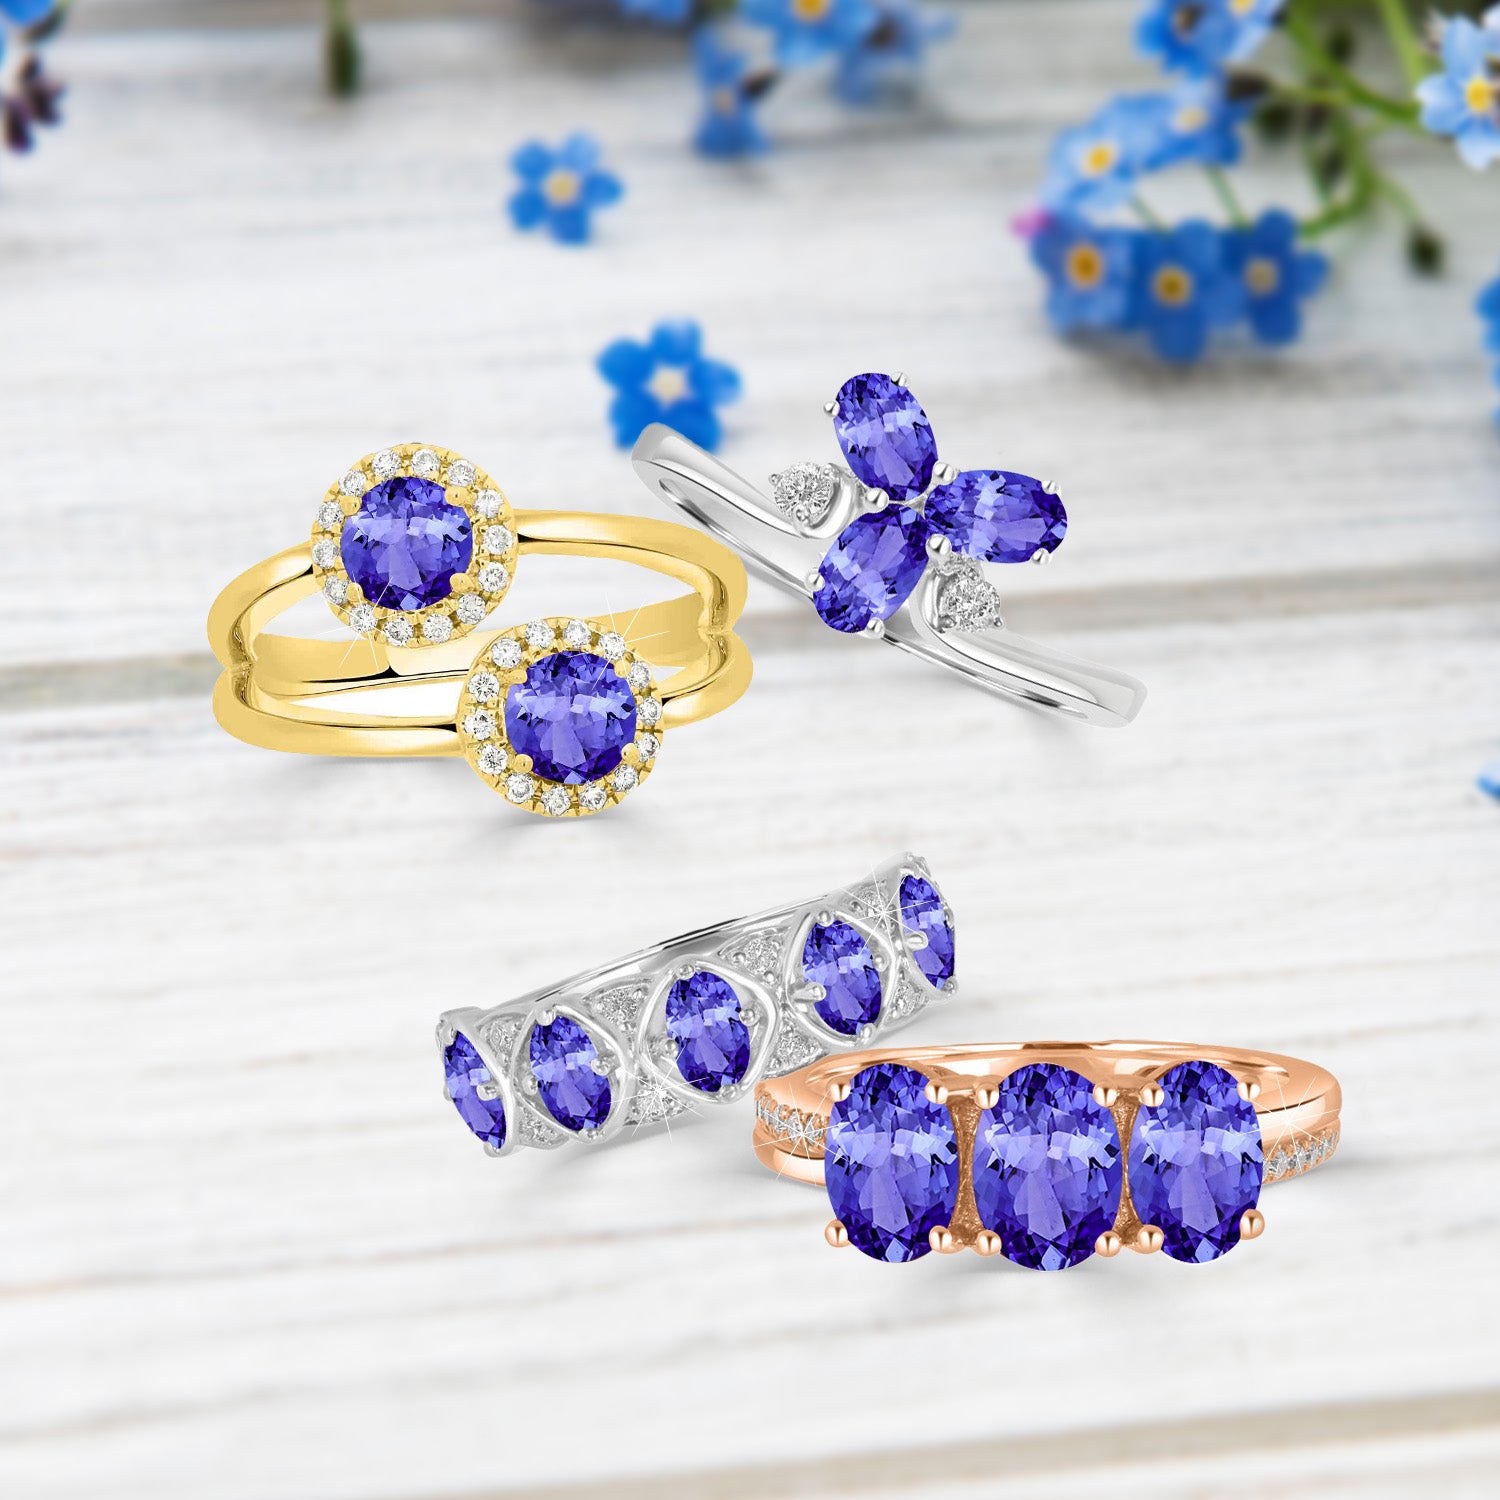 You Can Never Go Wrong With These Multi-Stone Tanzanite Ring Designs